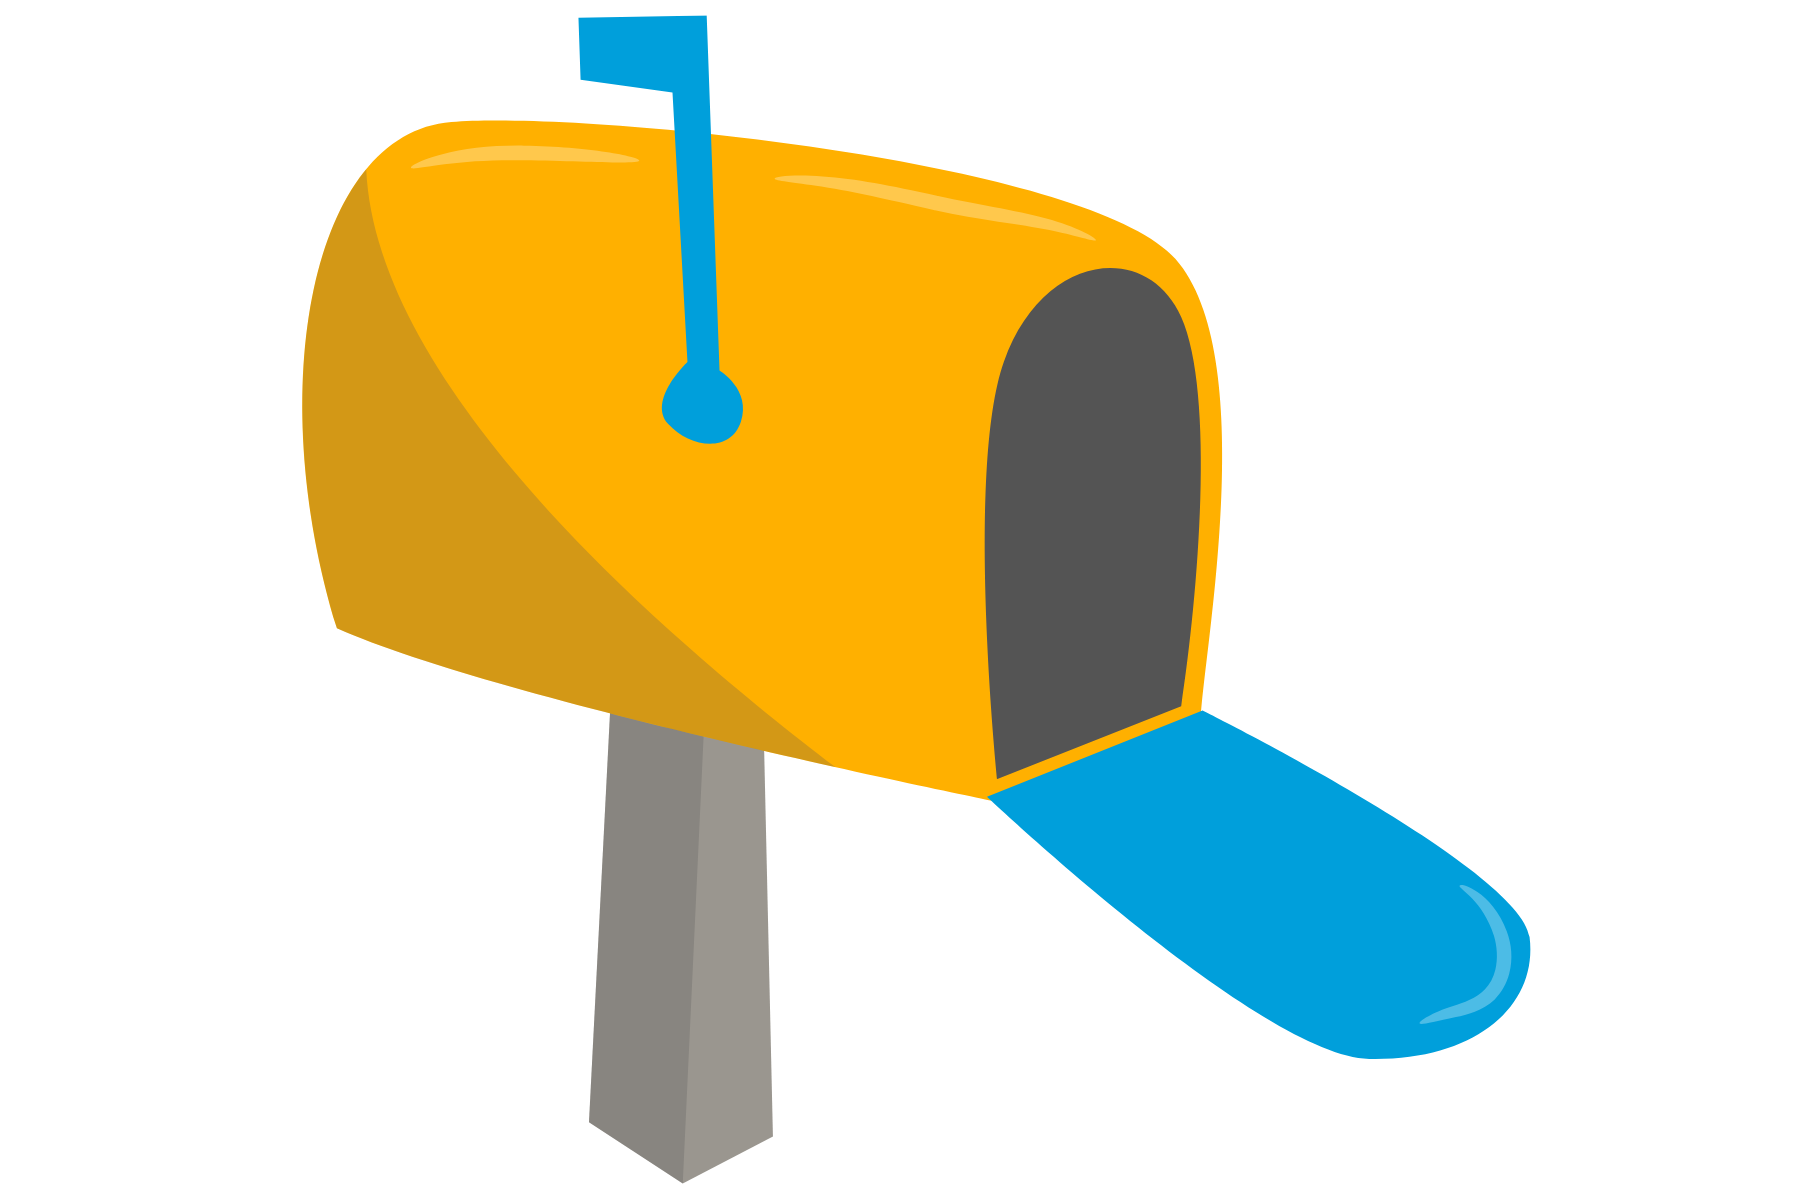 A yellow mailbox with a blue handle on a white background.